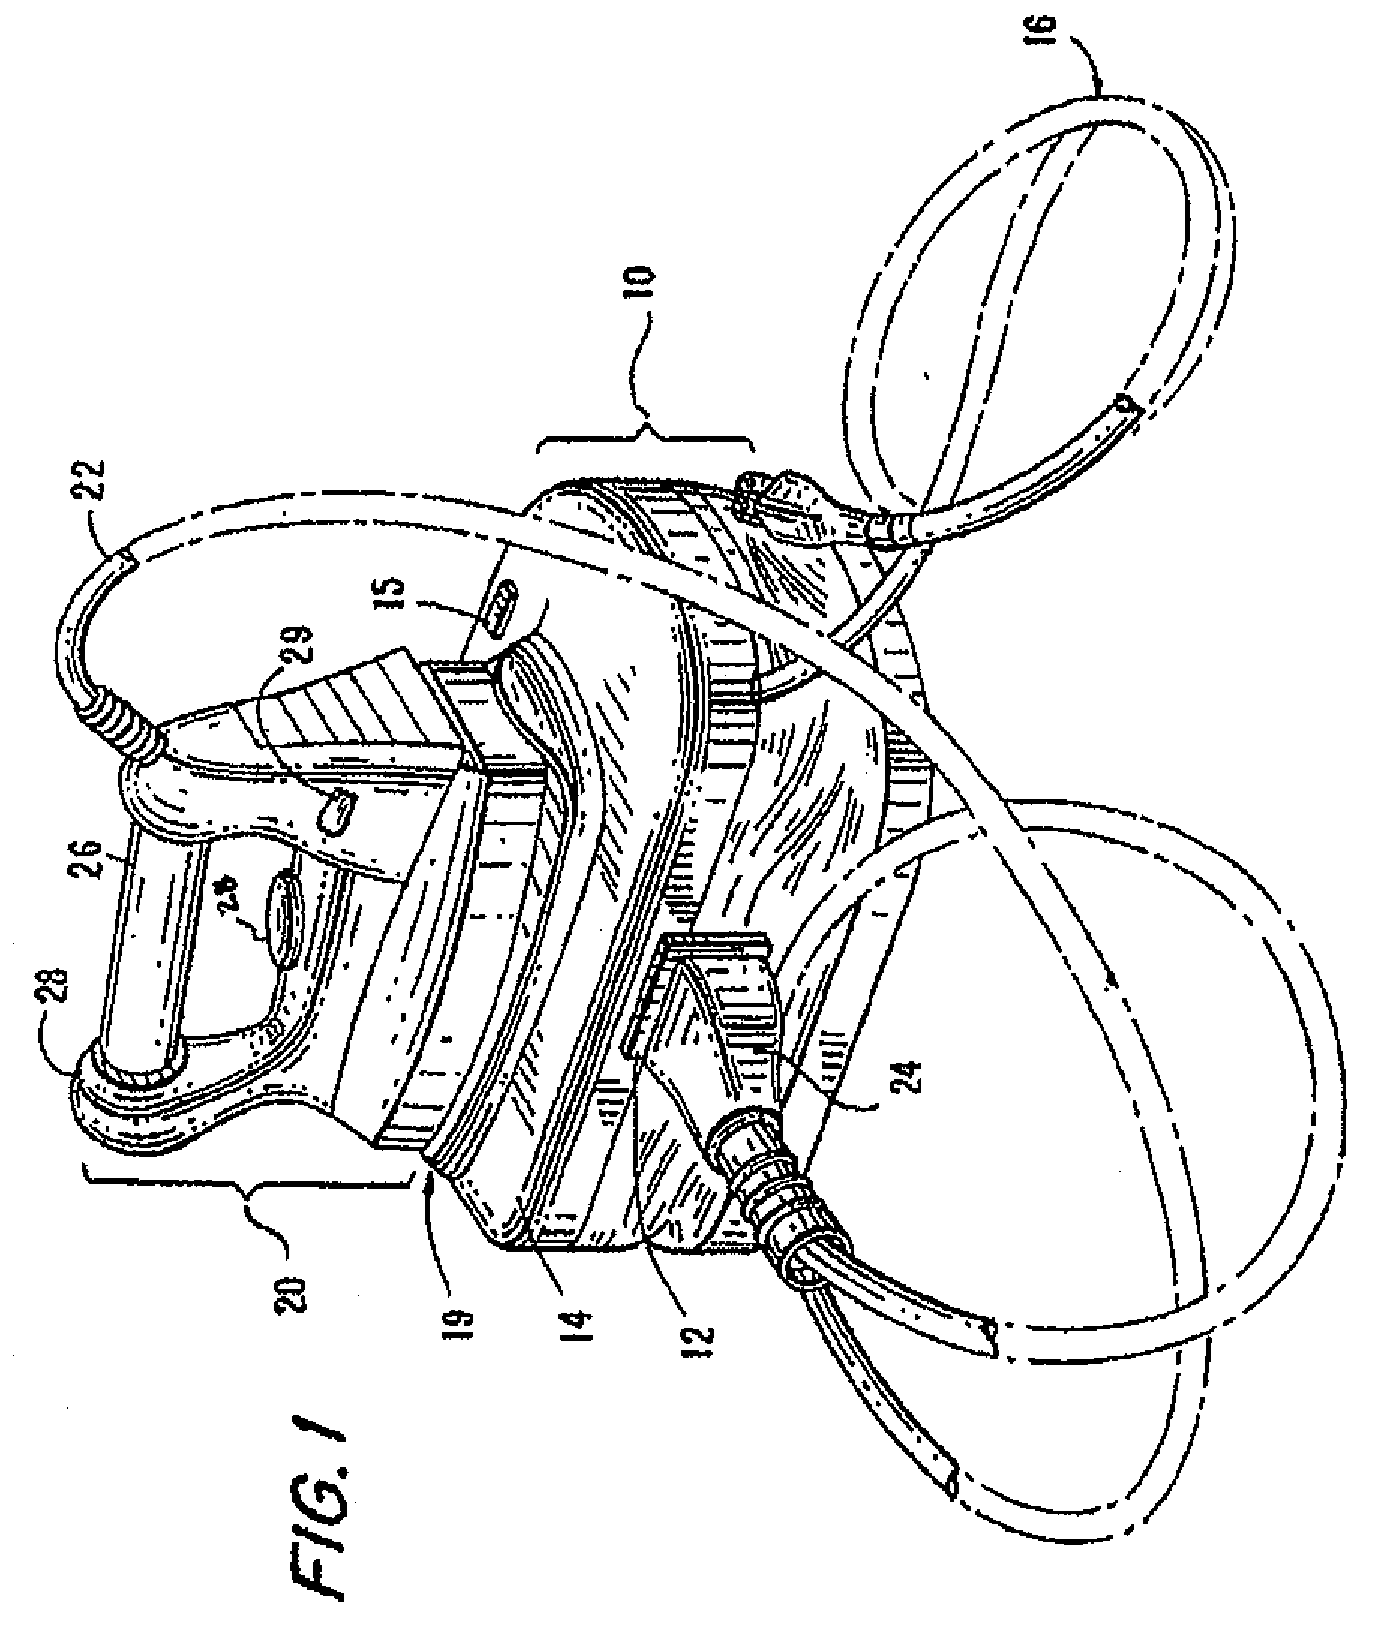 Steam cleaner and steam iron apparatus